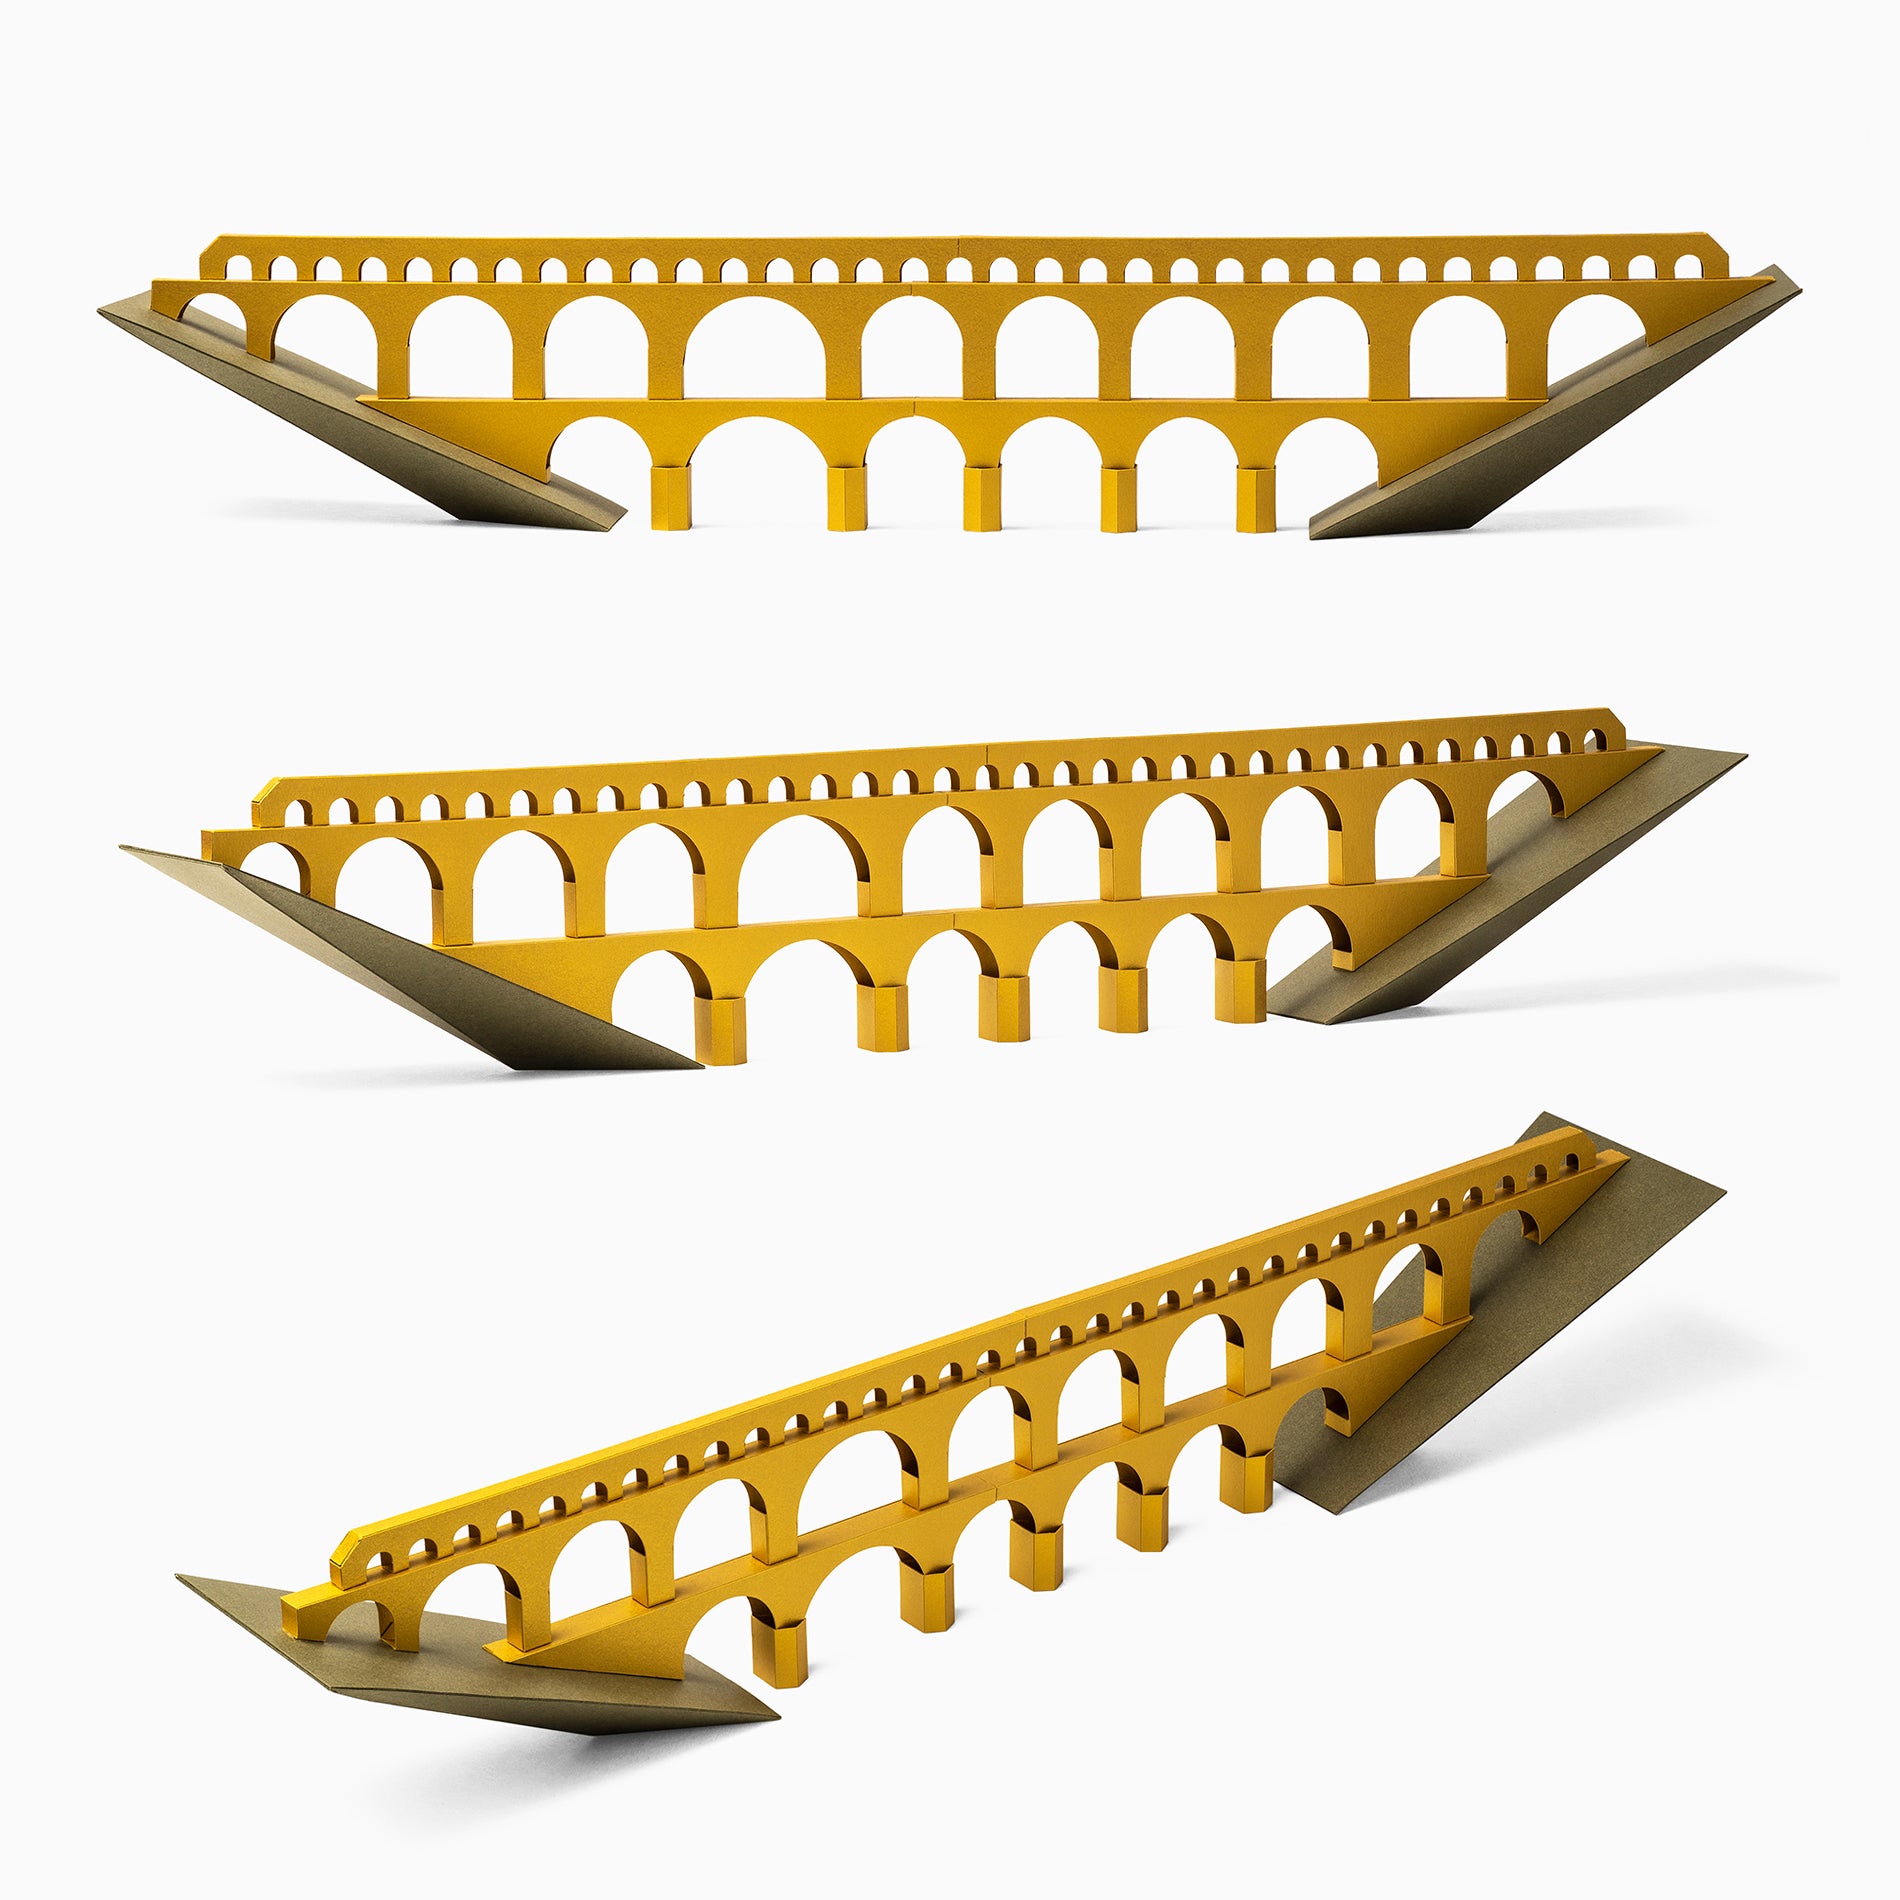 Pont du Gard Paper Model in Gold and Olive Colours by PaperLandmarks